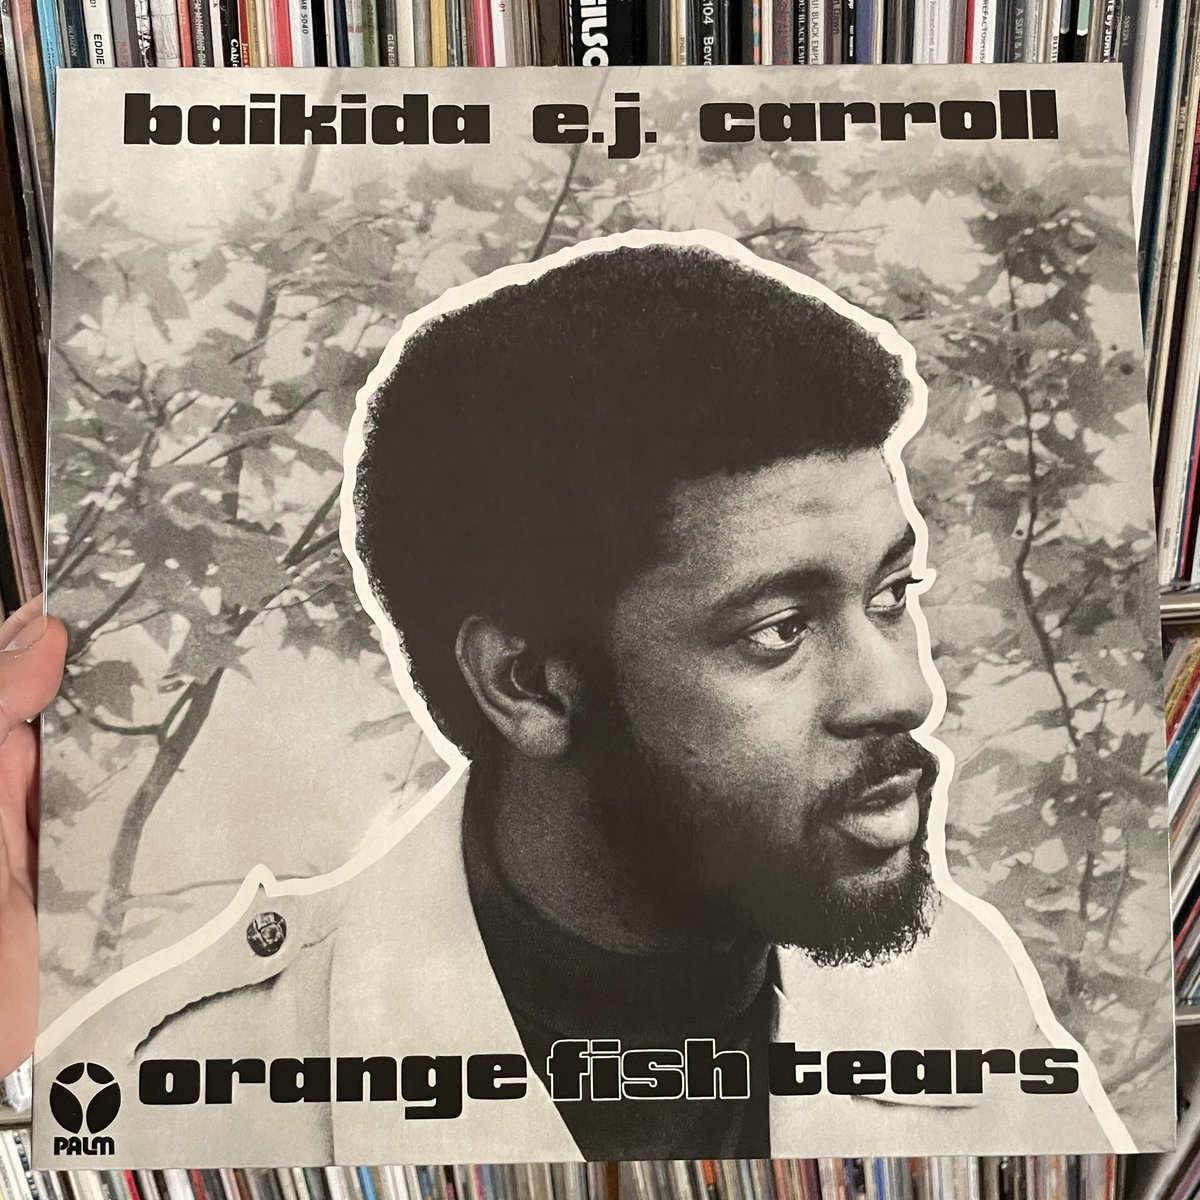 #NowPlaying Baikida E.J. Carroll - Orange Fish Tears (Palm, 1974 / SouffleContinu Records reissue, 2023). Trumpeter Baikida Carroll with Oliver Lake (saxophones, flute, percussions), Nana Vasconcelos (percussions) & Manuel Villarroel (acoustic and electric piano, percussions).